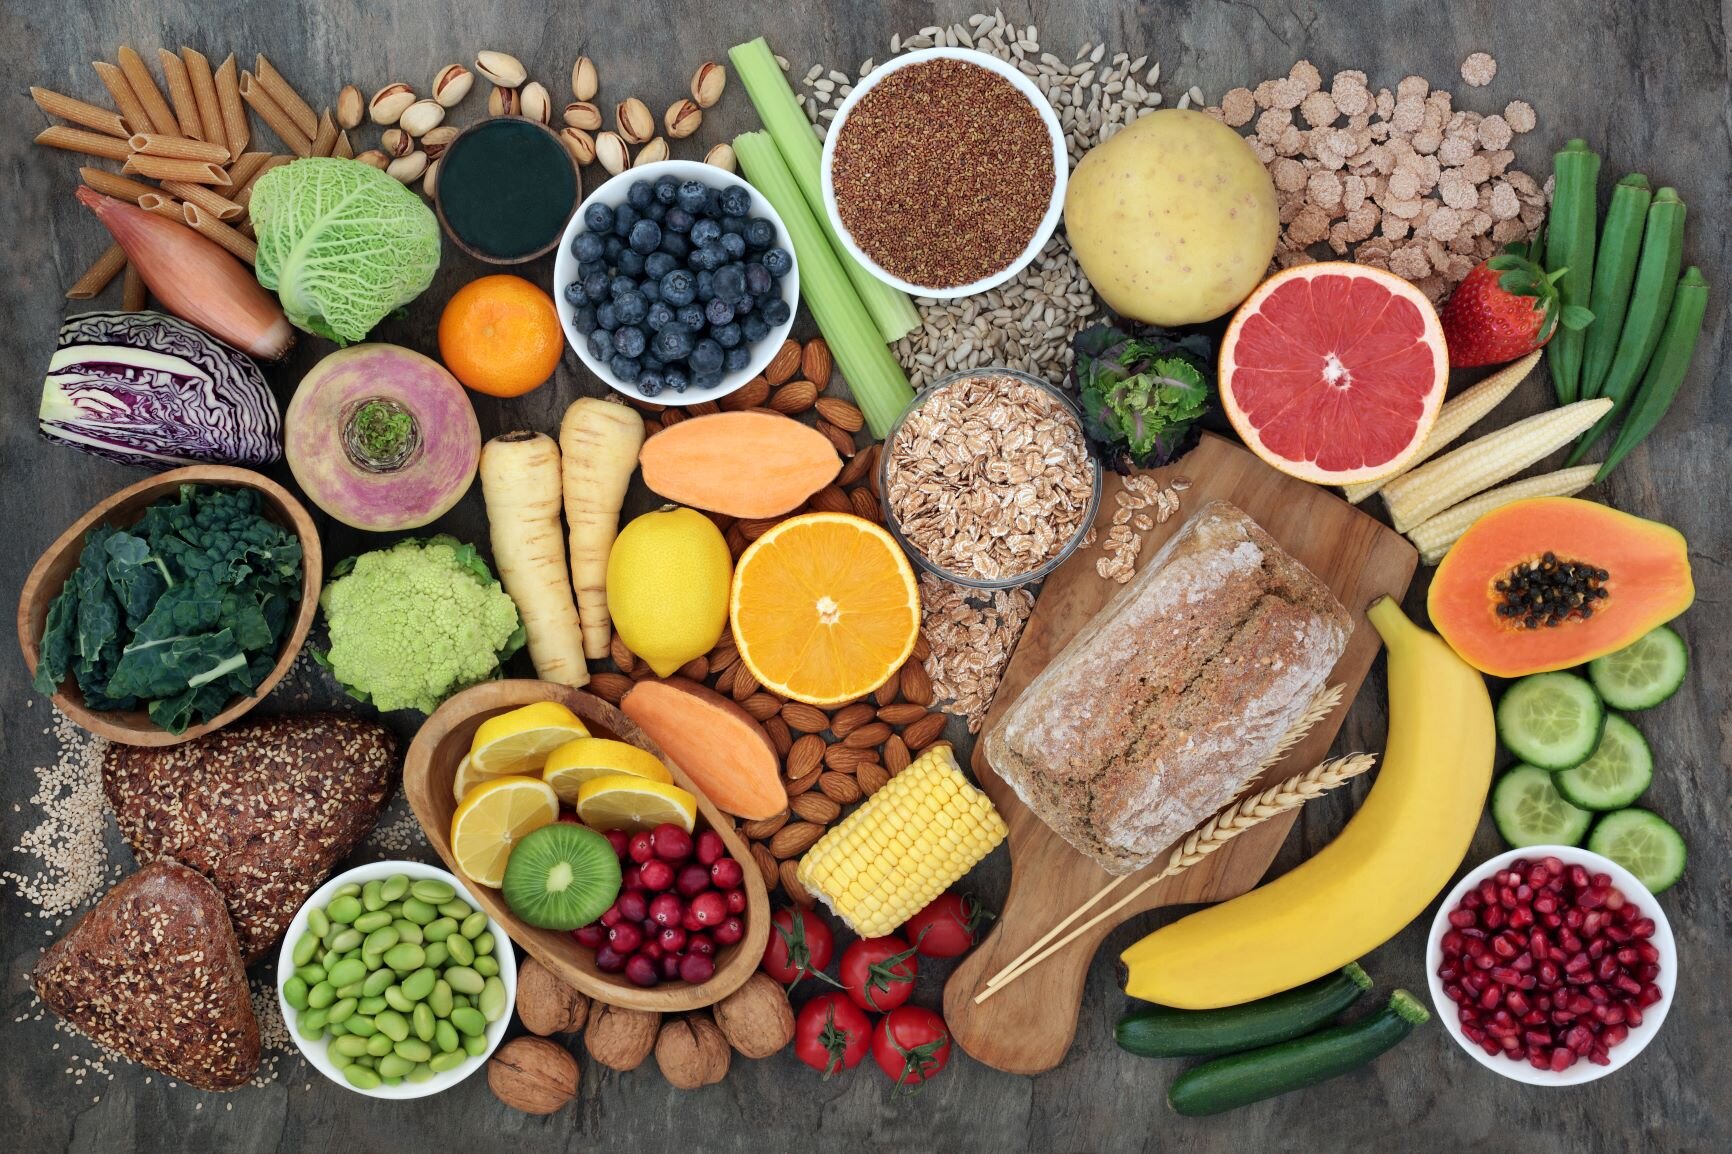 What happens if you don't eat a healthy balanced diet? What are the risks?